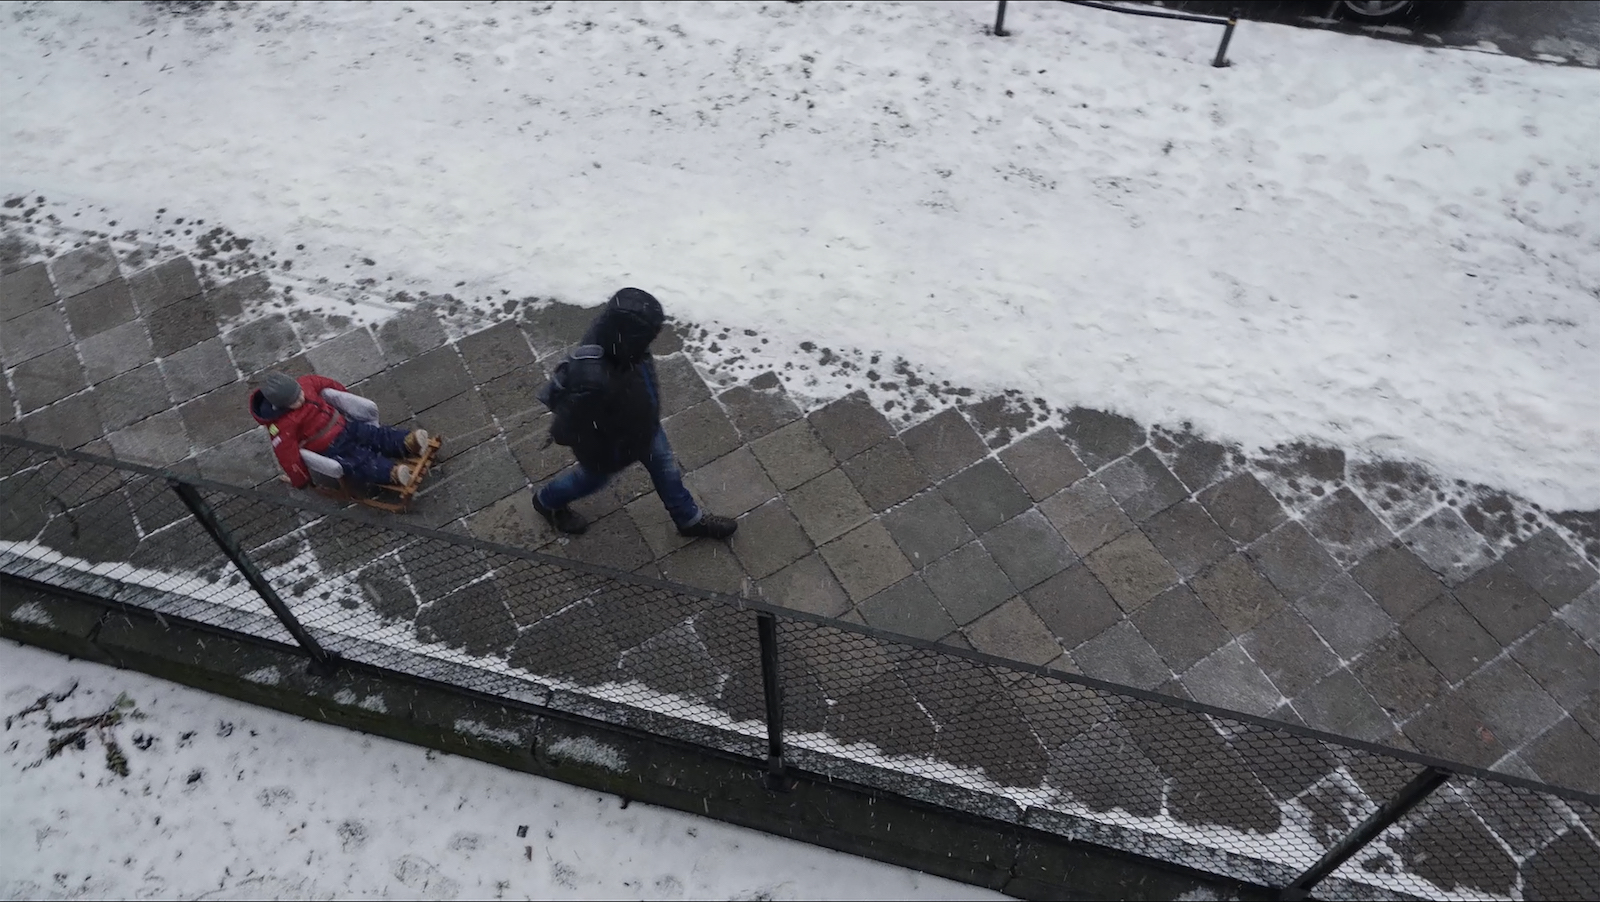 An adult figure pulls a child in a small sled on a wintry street as seen from a high balcony.